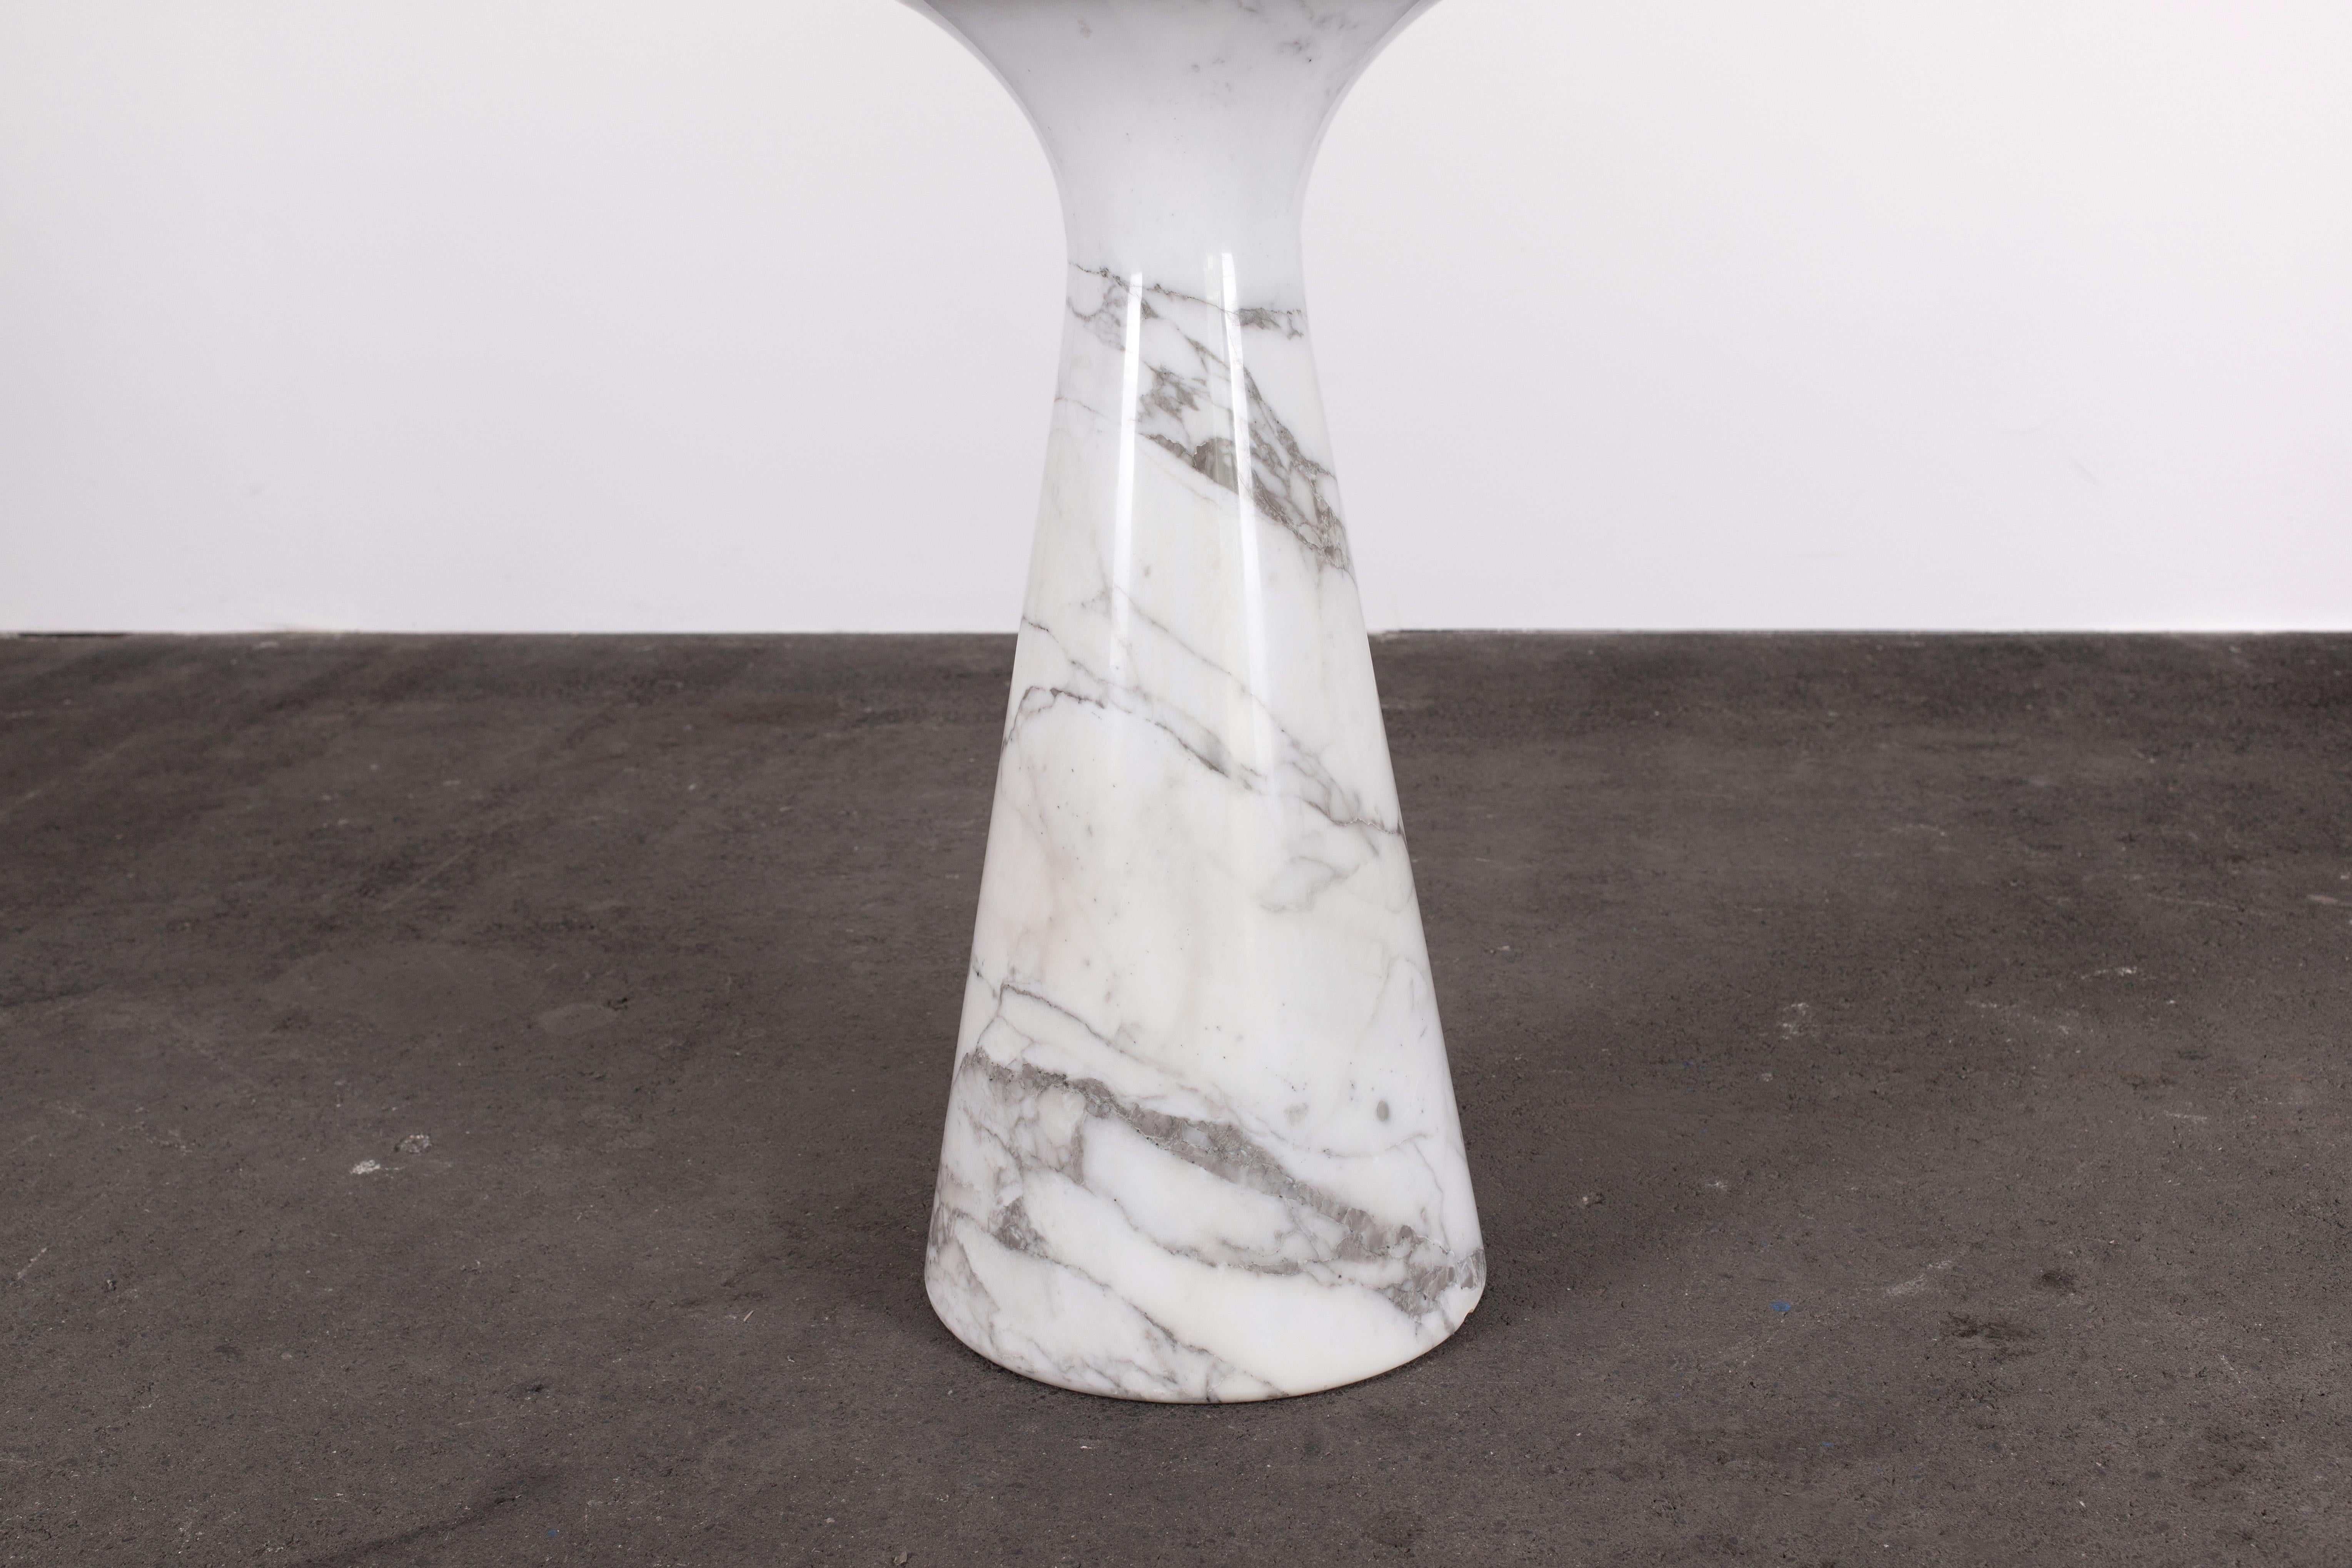 1970s Organic Modern Angelo Mangiarotti round pedestal dining table for Skipper in highly figured white Carrara marble with blue-gray veins and subtle metallic flecks. This table is from the M1 and measures 47in (130cm) in diameter.

The detachable